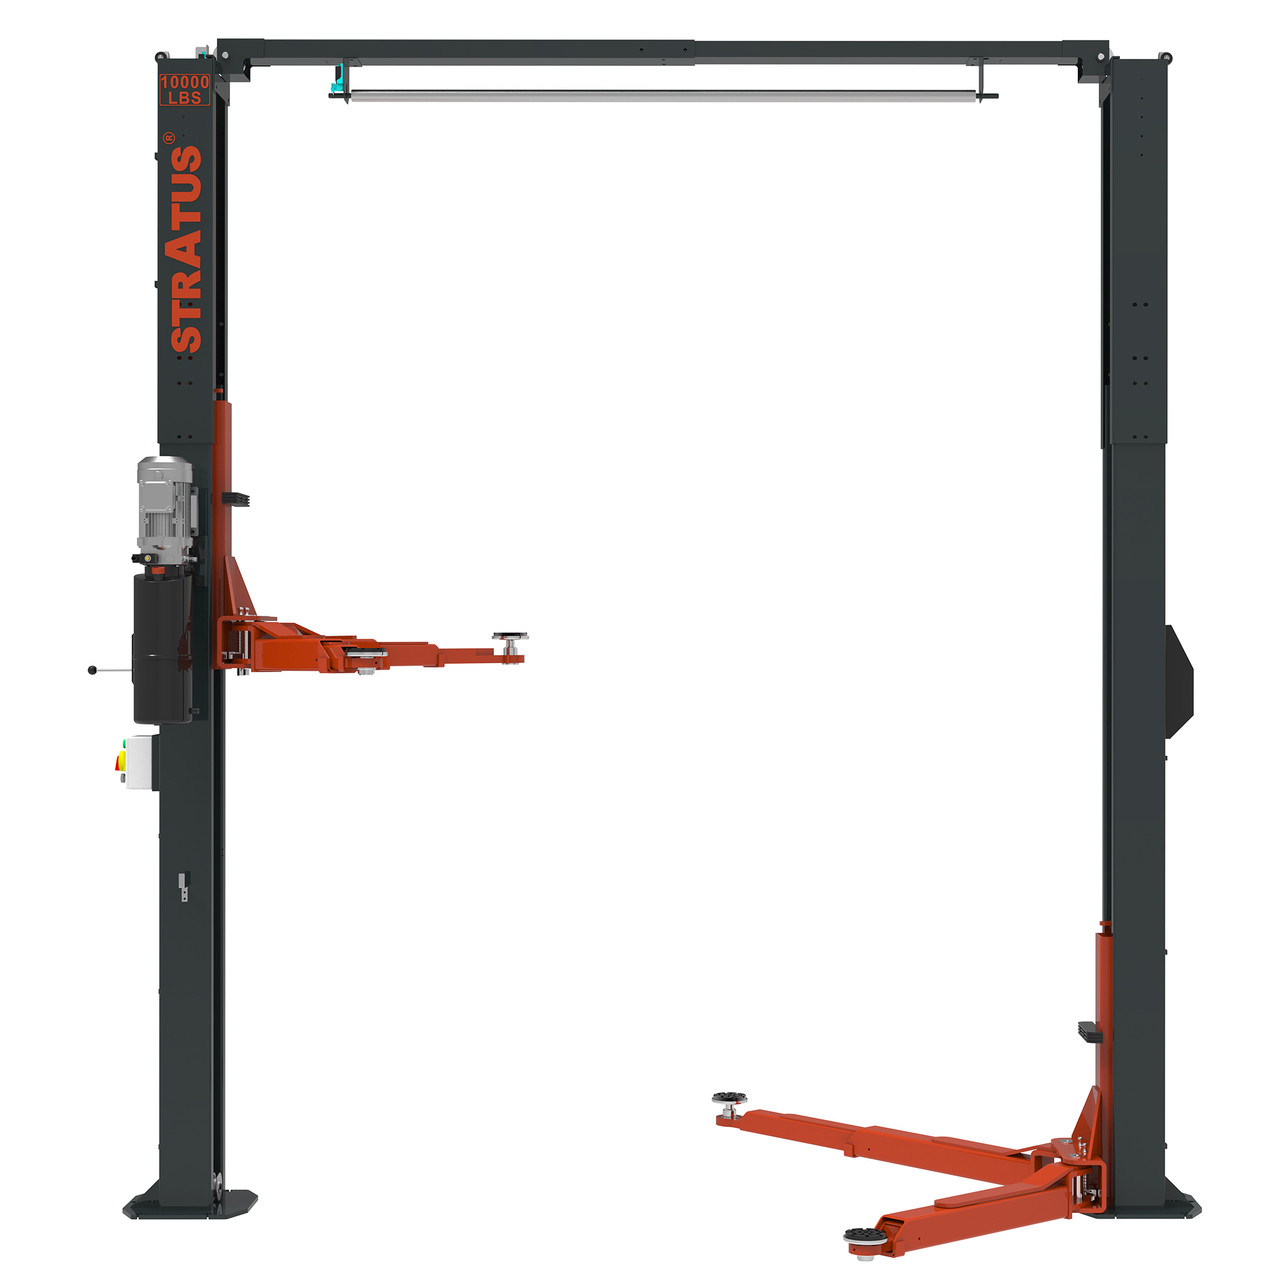 This advanced car lift not only provides an impressive 10000 lbs capacity, but also offers the benefit of a clear floor design, making it way easier to access undercar components without any obstruction